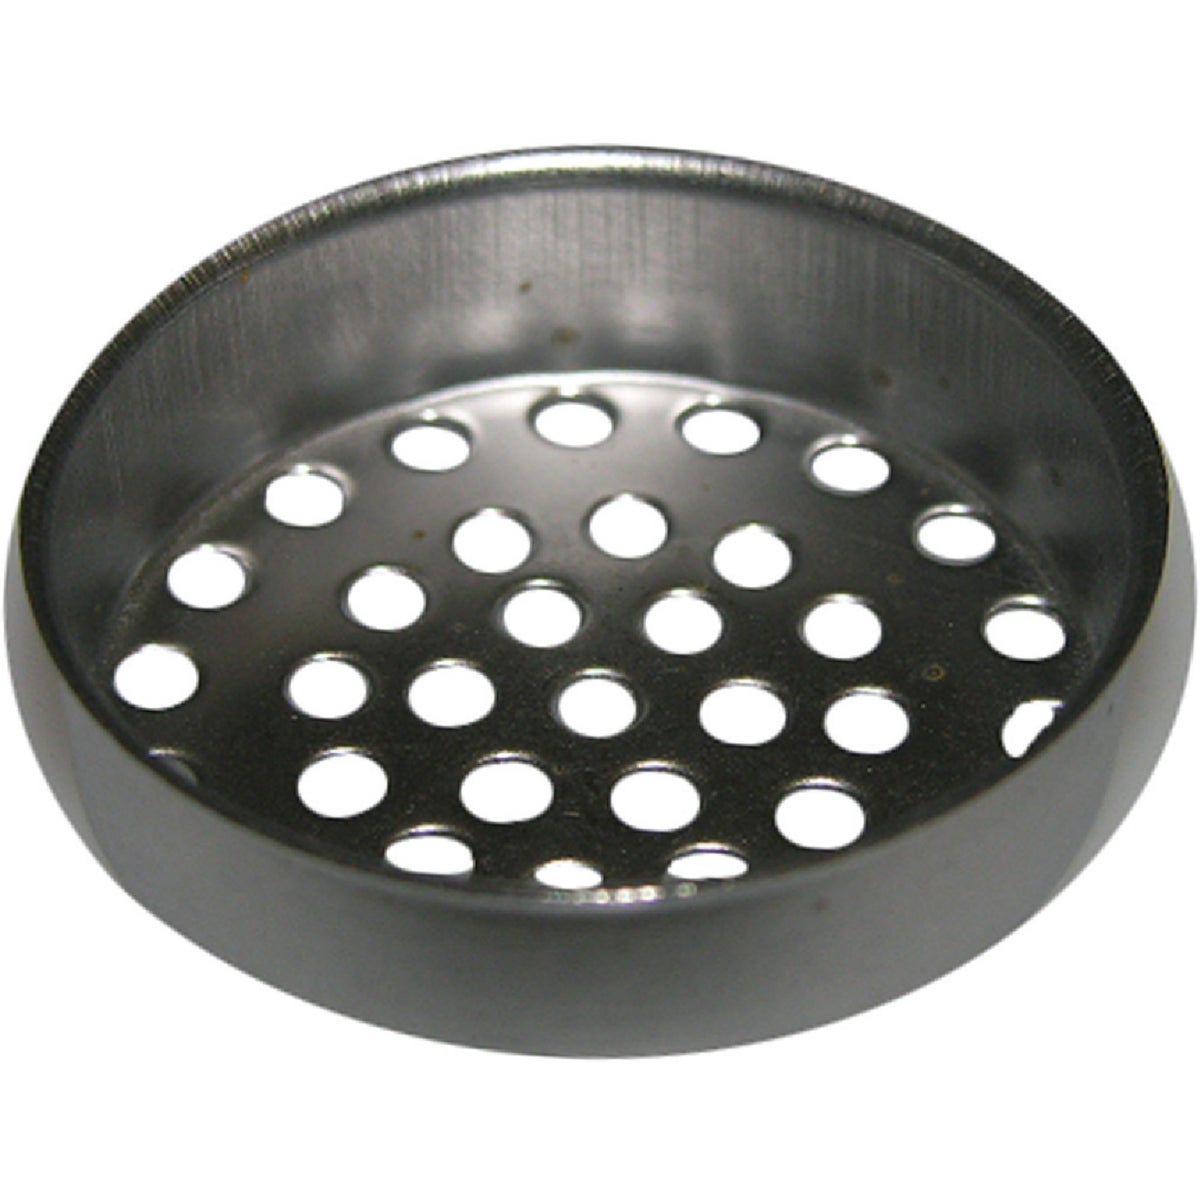 Lasco 1-1/2 In. Chrome Removable Laundry Tray Strainer Cup